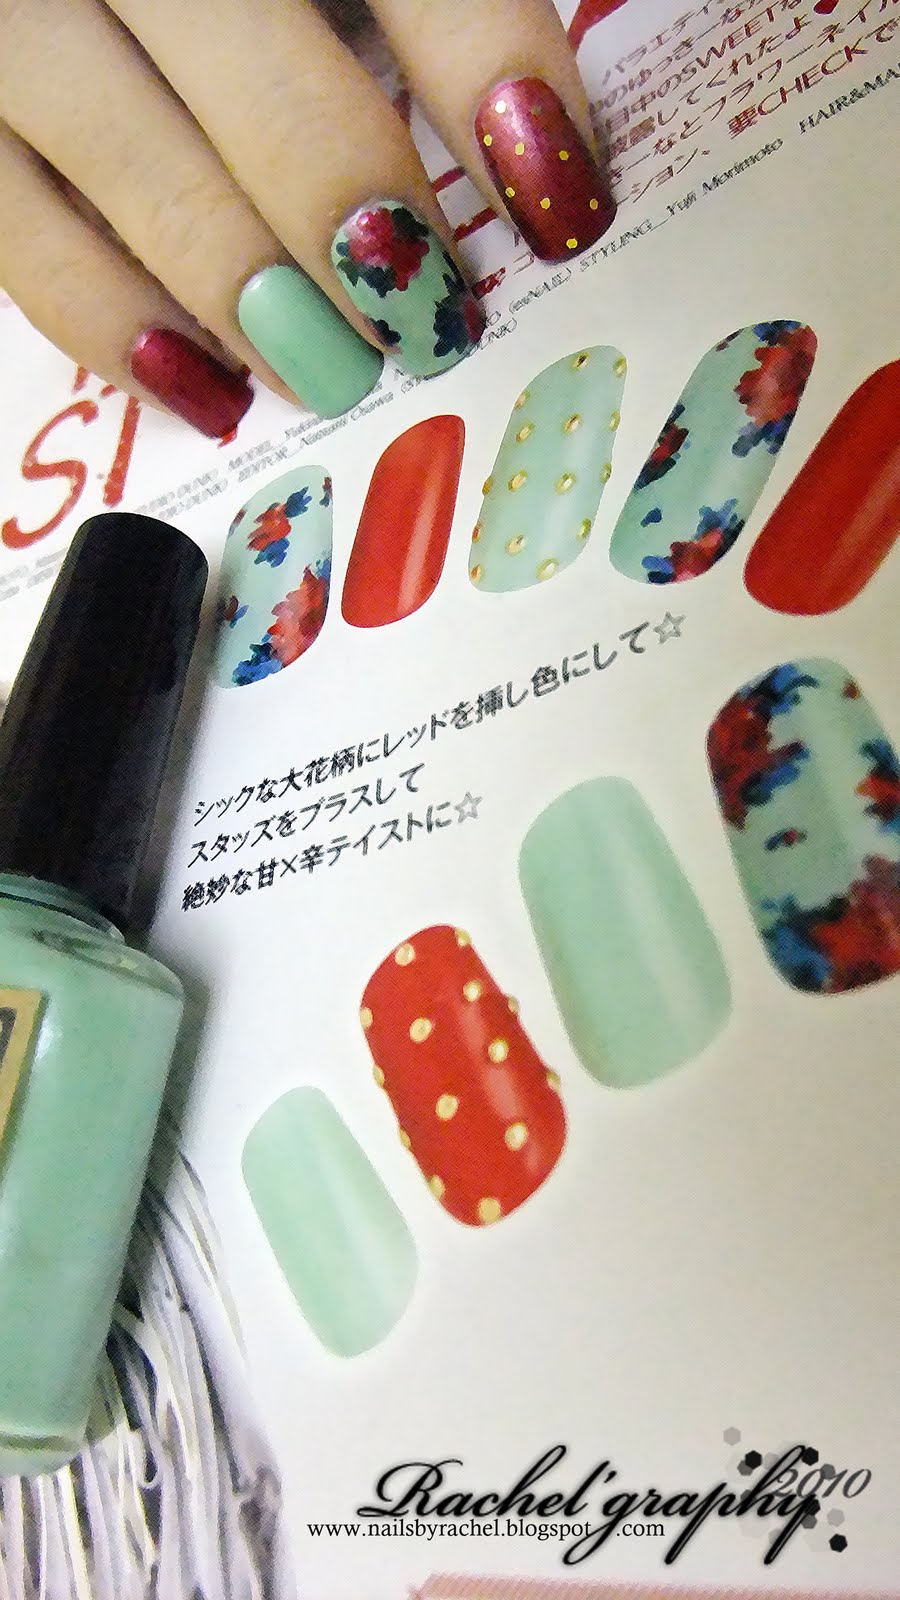 (it's hard to find fresh from Japan nail magazine here.. :( )